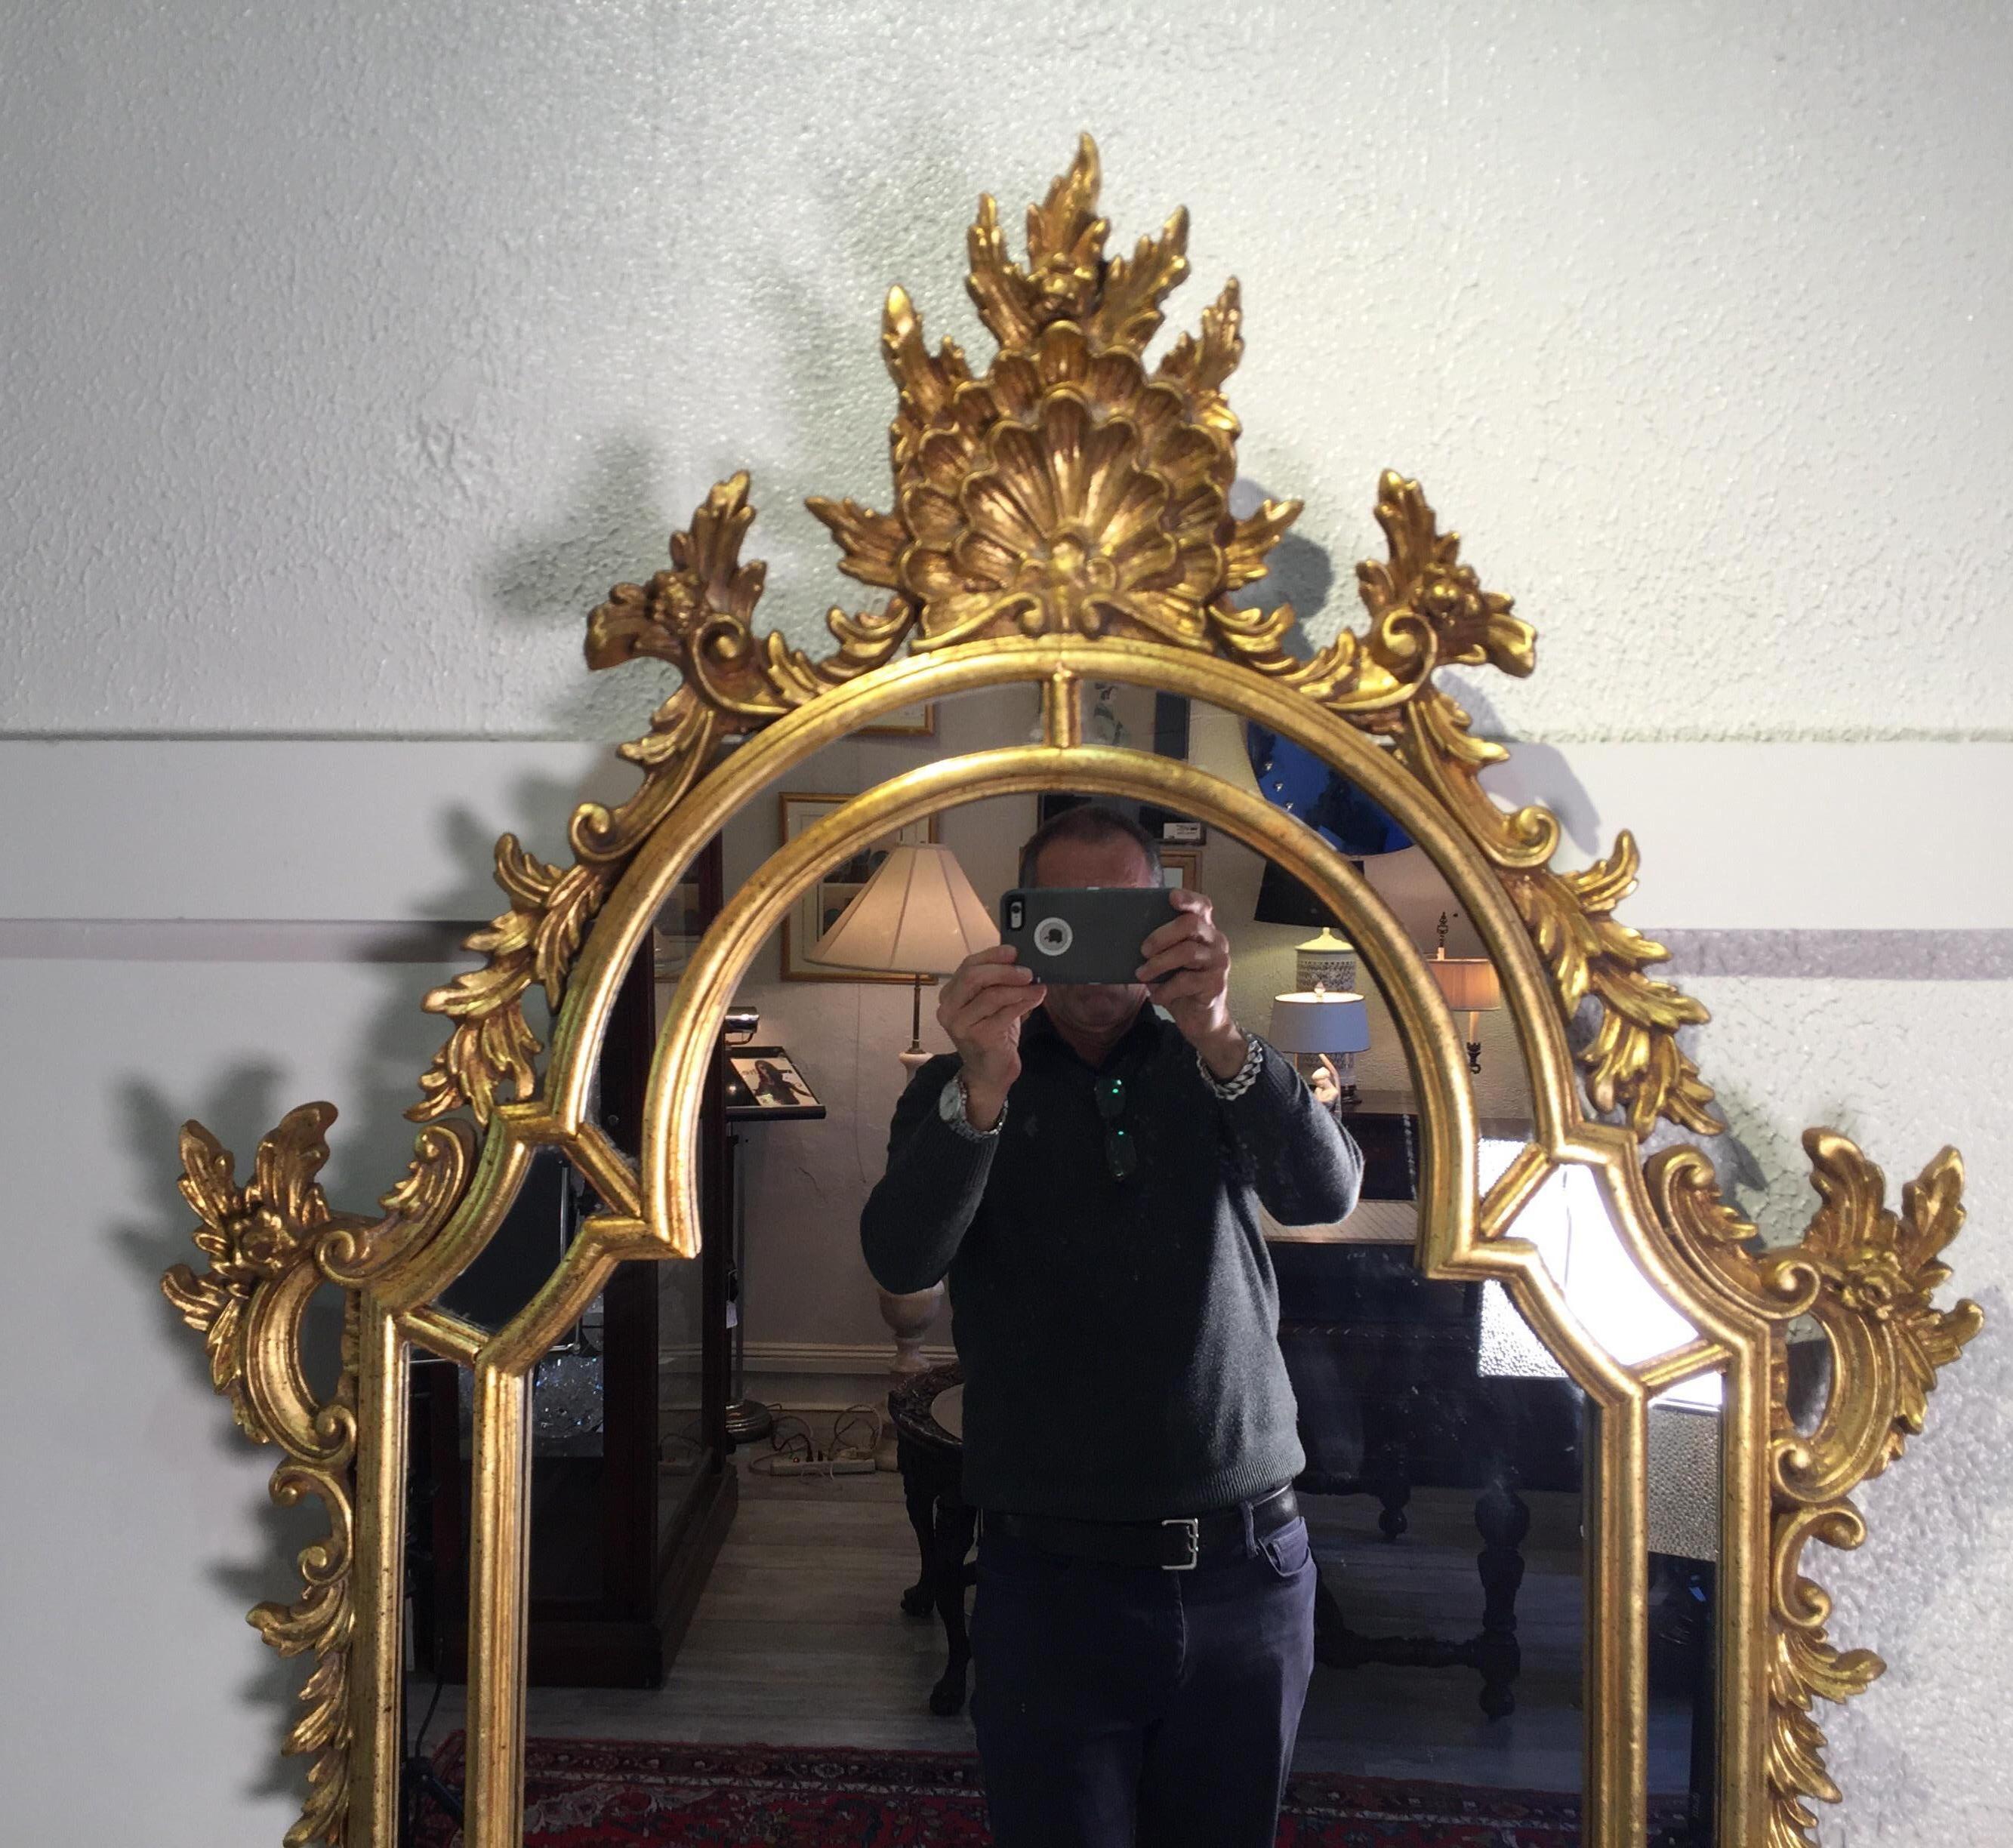 la barge mirror made in italy